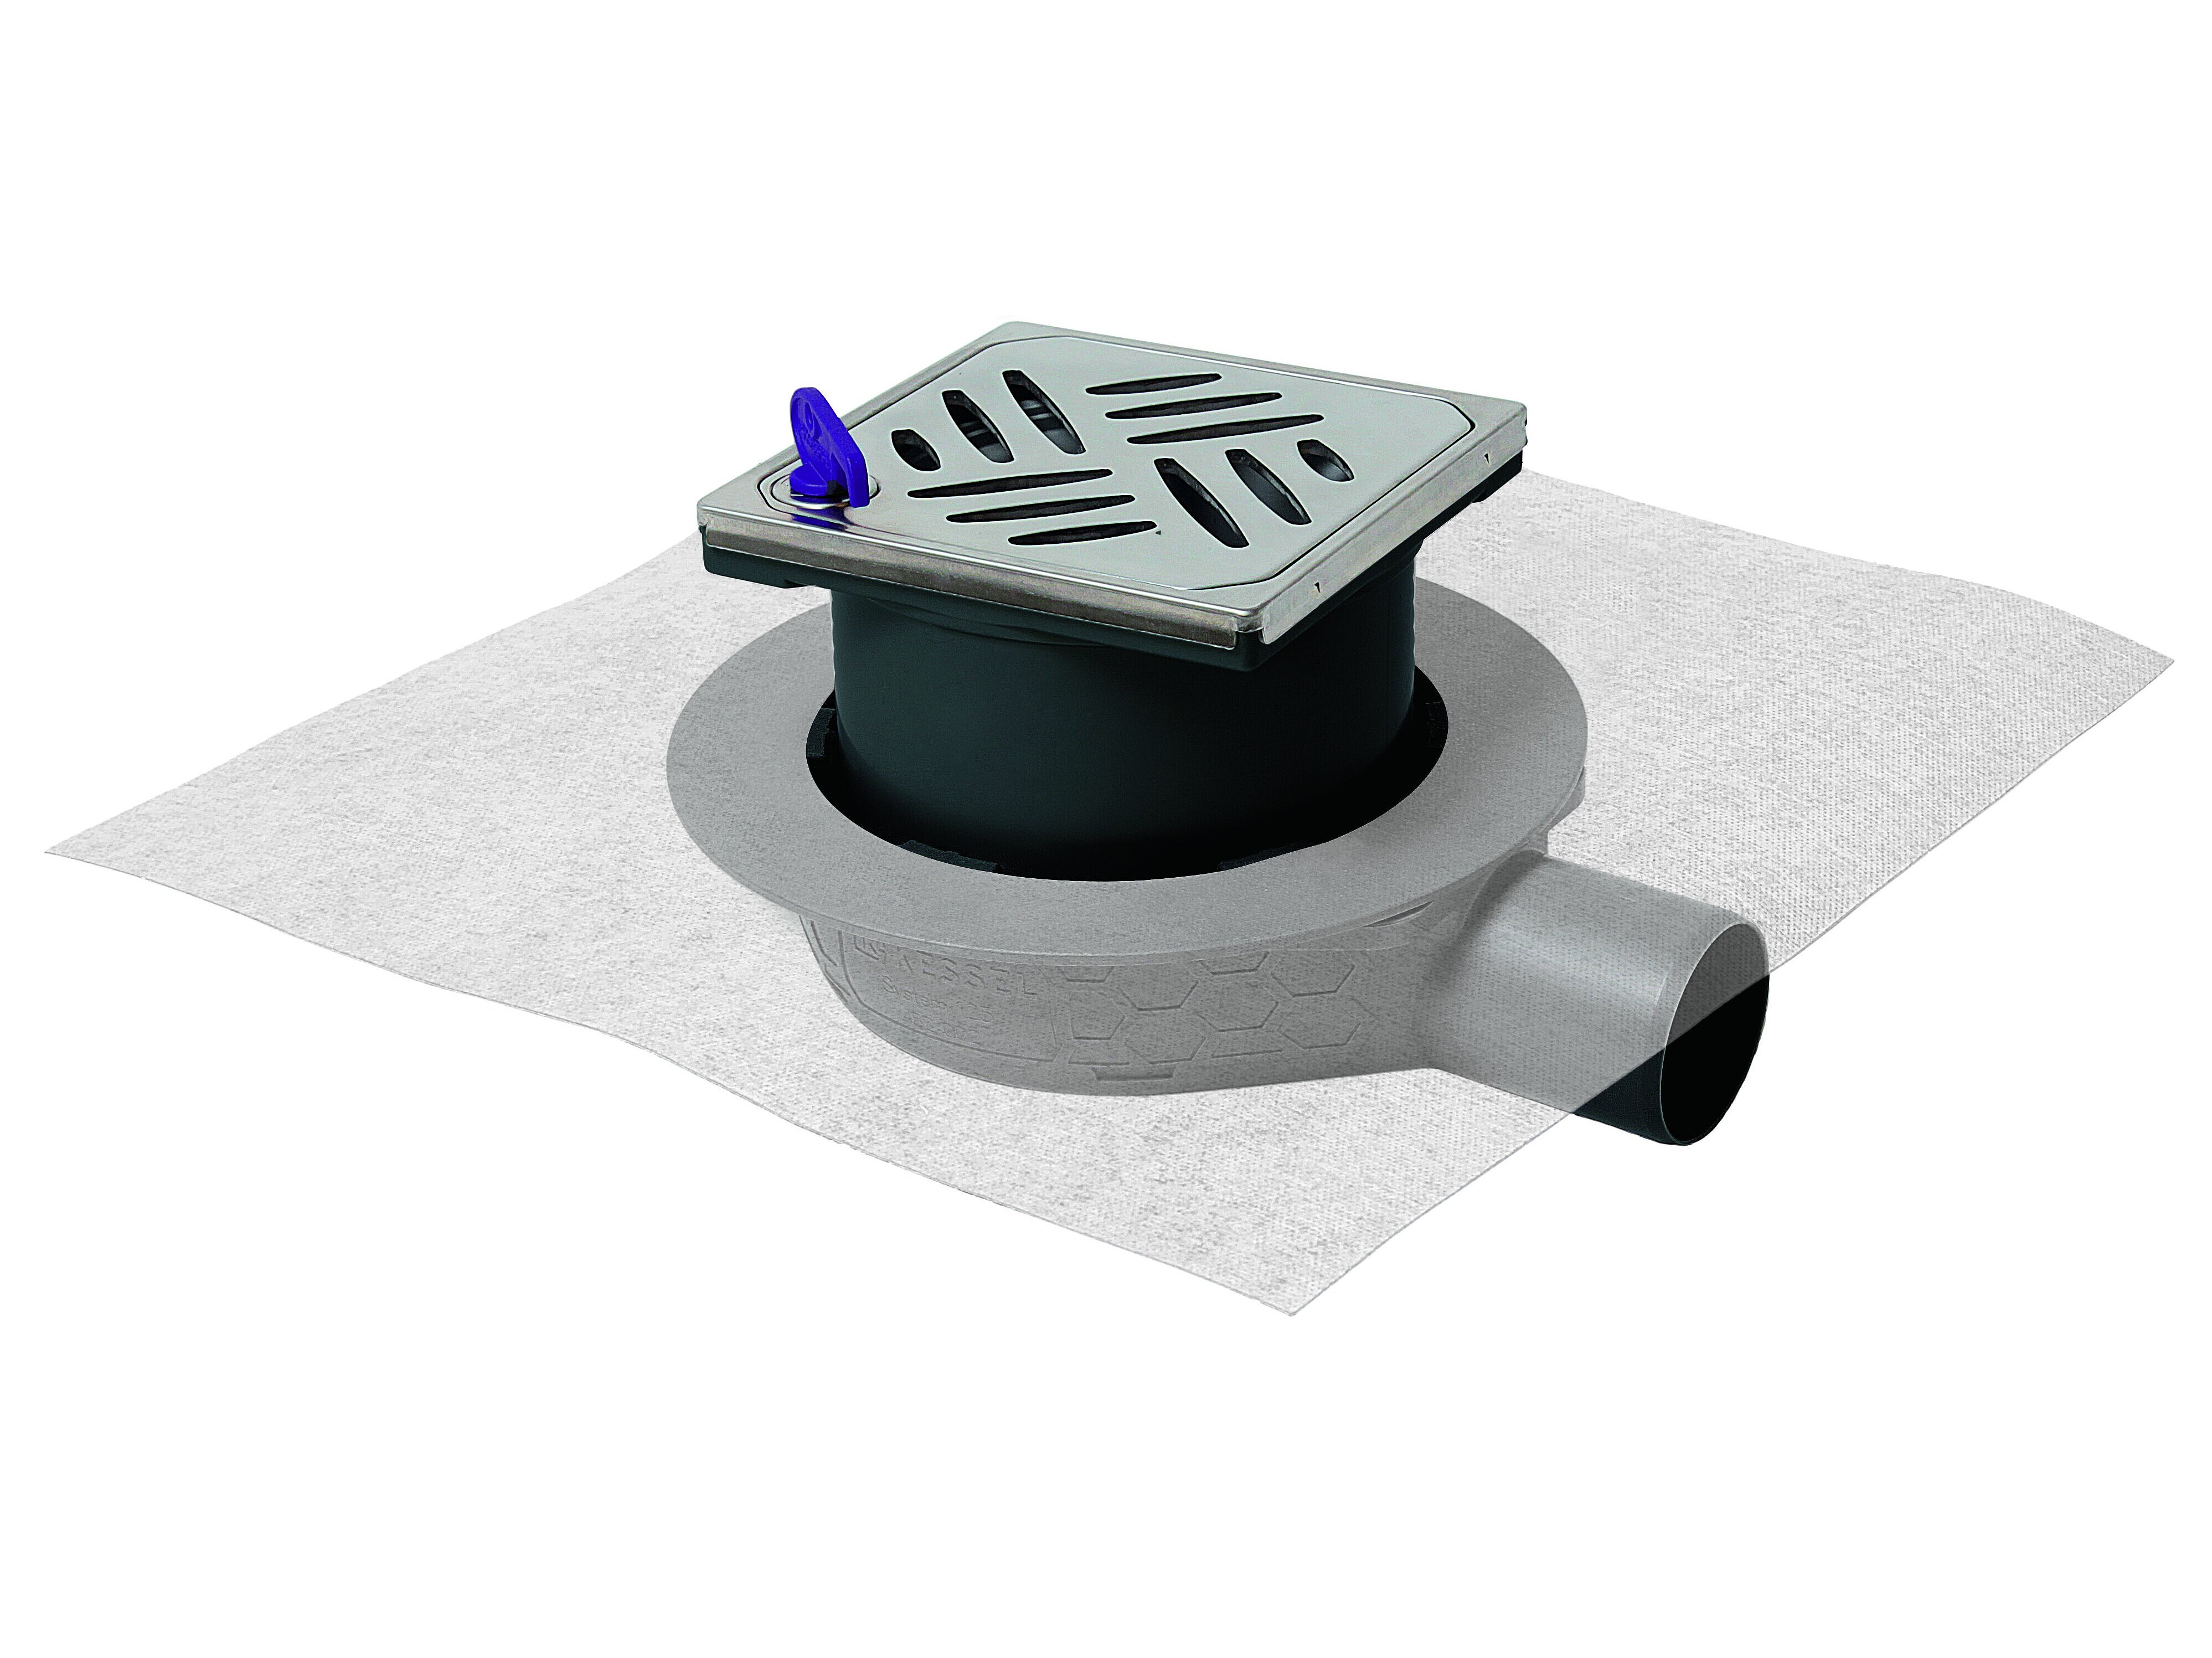 The Ultraflat 54 bathroom drain, DN 50, with a slotted cover, Lock & Lift locking system and Megastop